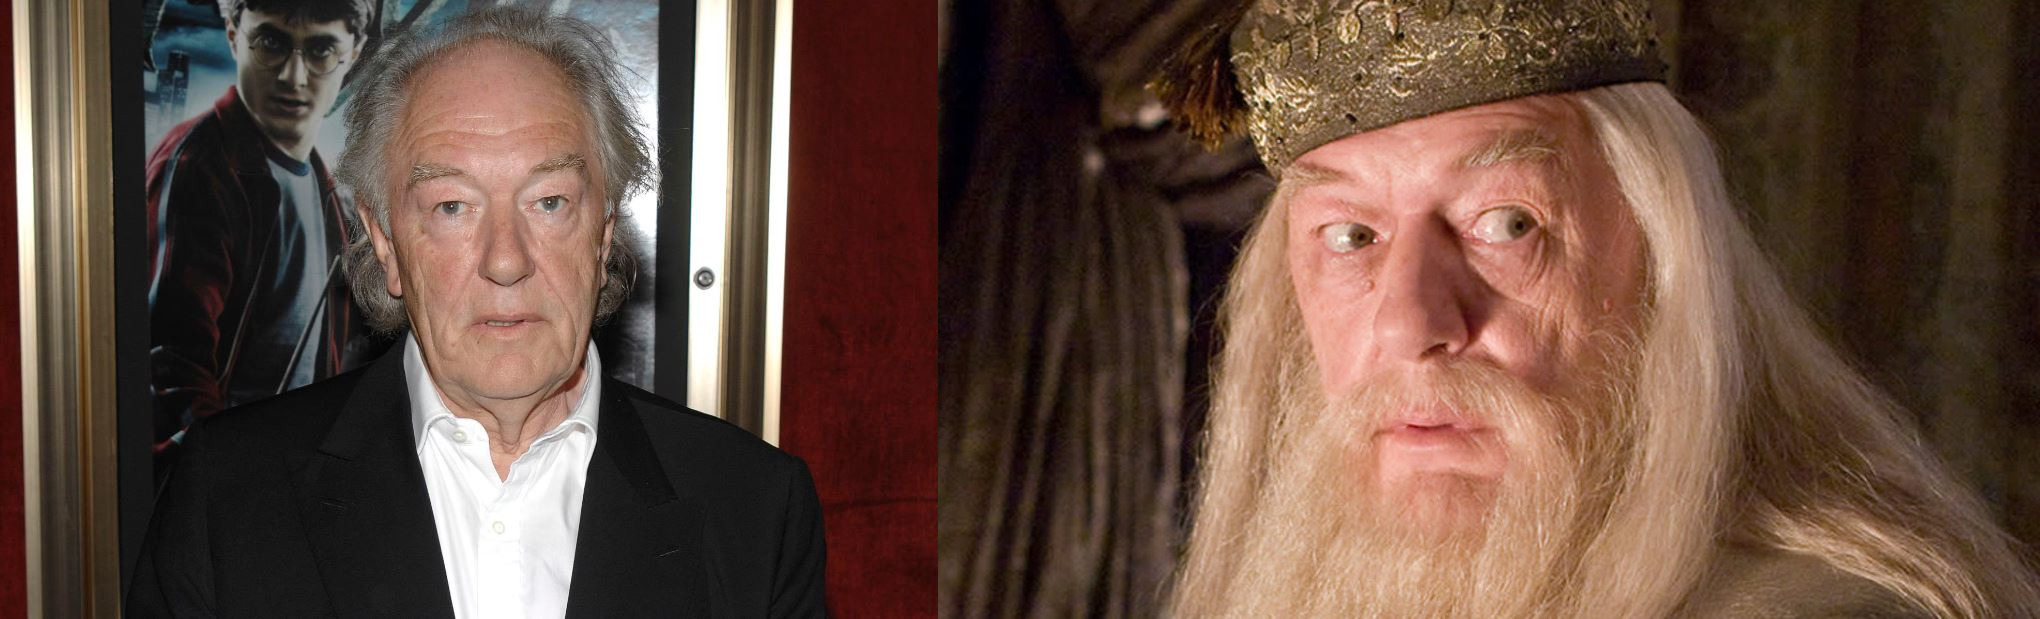 Harry Potter actor Michael Gambon who played Dumbledore died at the age of 82